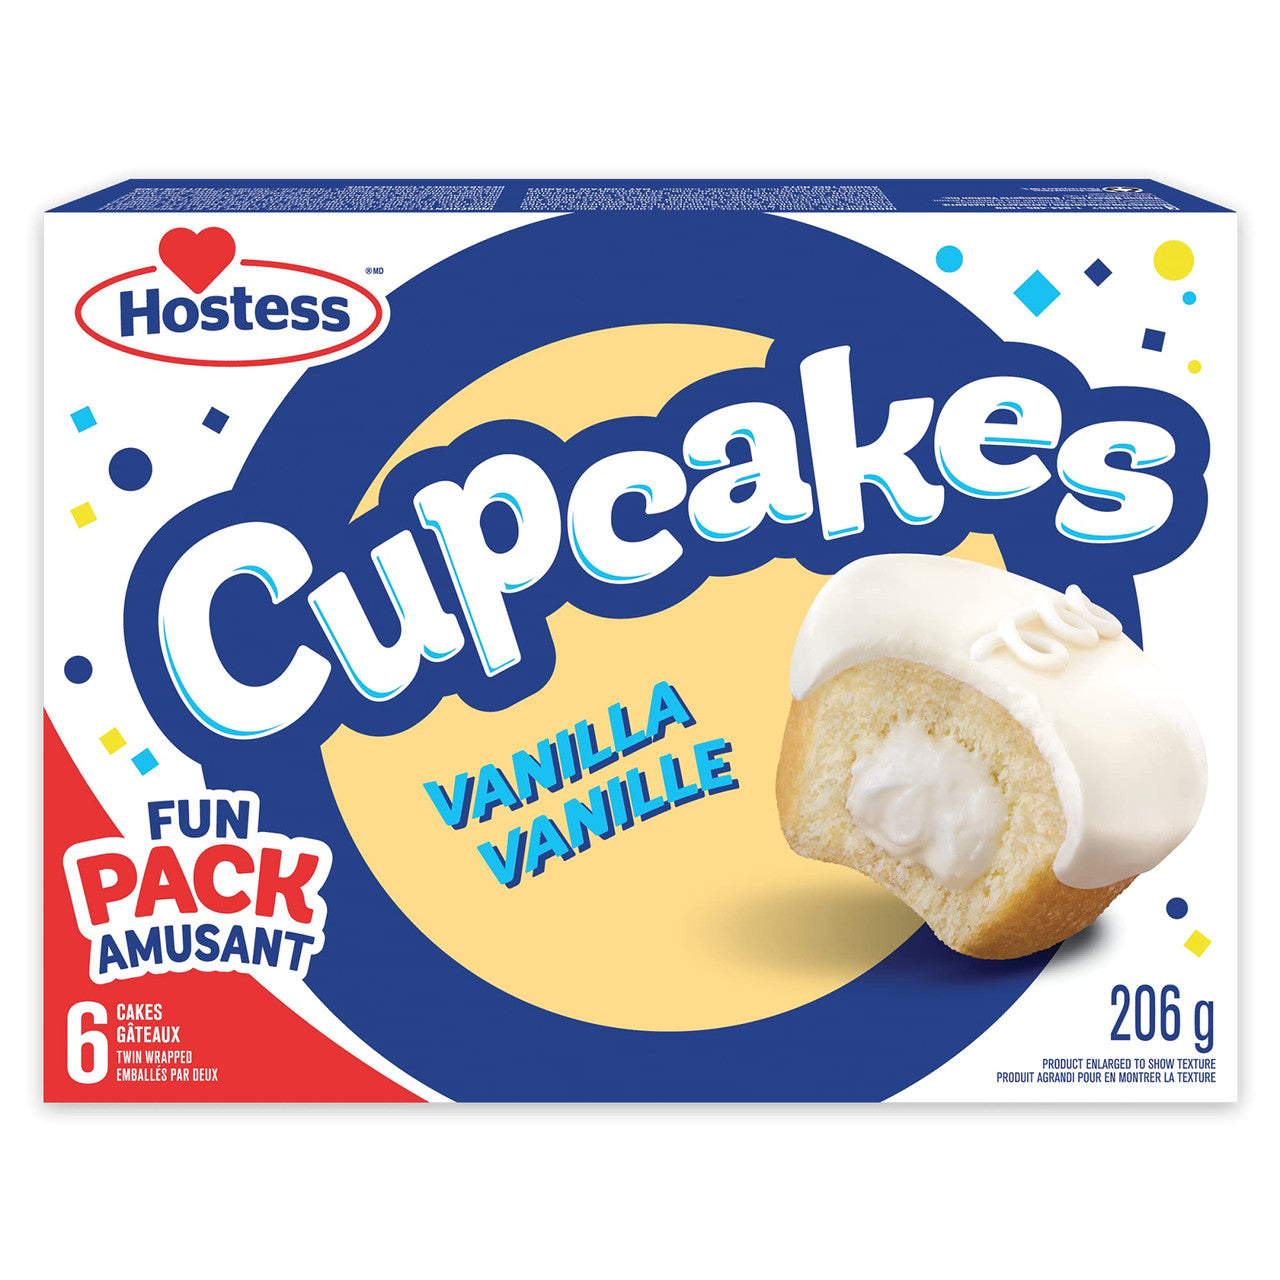 Hostess Vanilla Cupcakes with Frosting and Creamy Filling, Snack Cakes, Contains 6 Cupcakes (Twin Wrapped), 206g/7.3 oz, Box, {Imported from Canada}